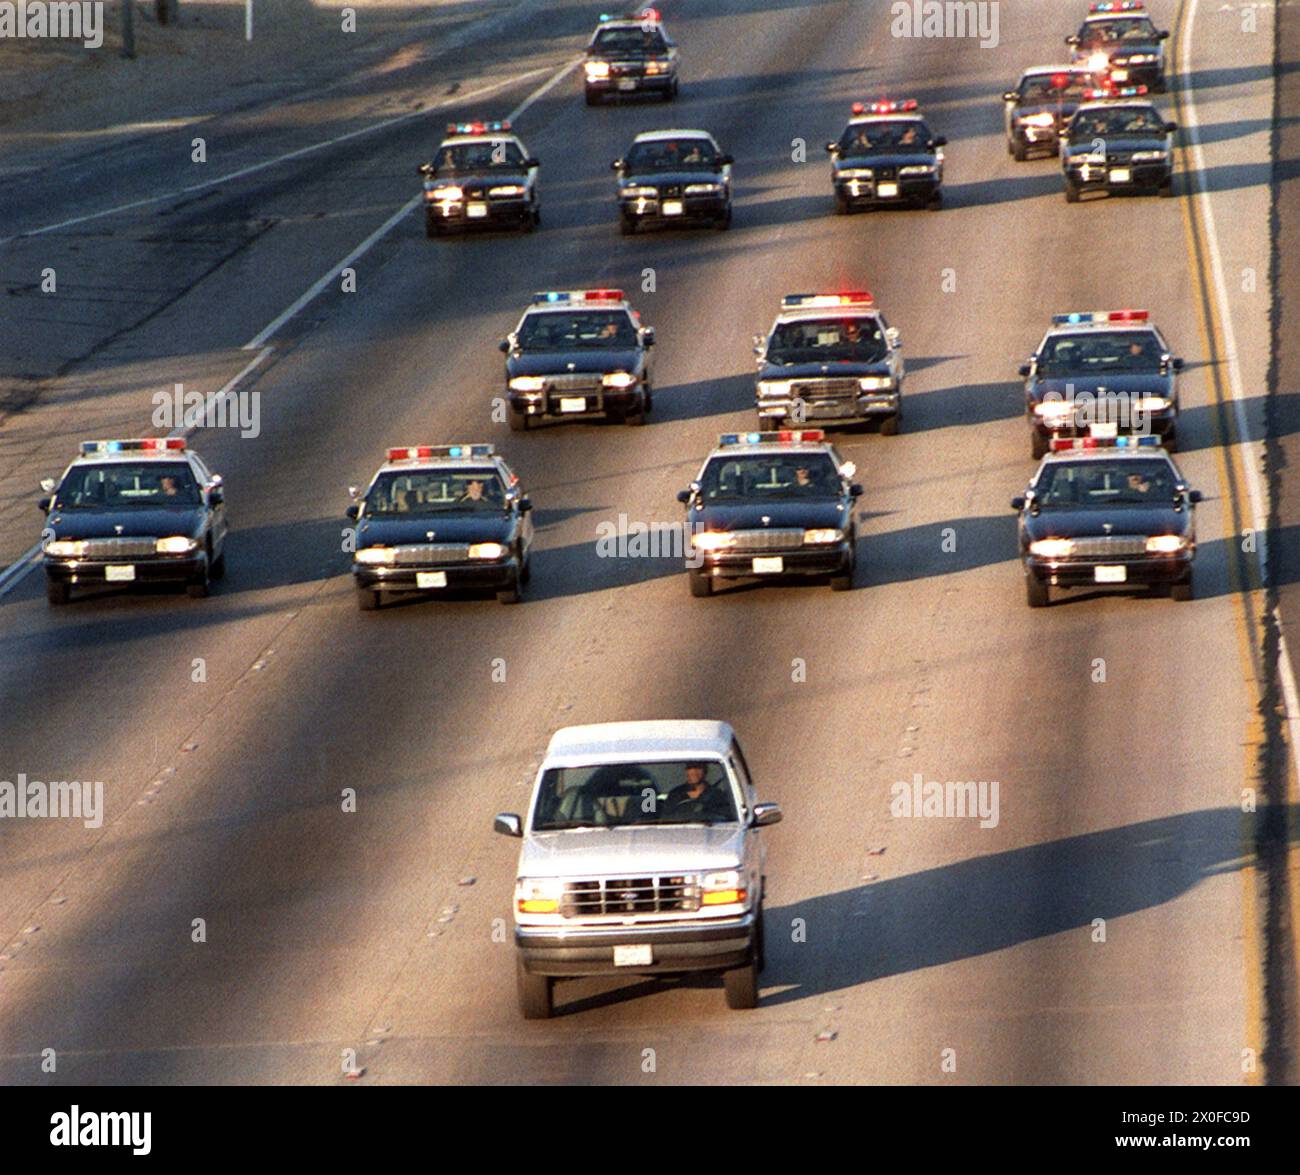 June 17, 1994, Los Angeles, California, USA: Wilmington Avenue overpass view of over a dozen California Highway Patrol cars in close pursuit of NFL football Hall of Fame superstar, TV/Film star O.J. SIMPSON, 46, who in the backseat of his friend's white Ford Bronco, with a gun to his own head, on the 91 freeway westbound. The Bronco is being driven by friend A.C. COWLINGS, 46. When Simpson returns to his home on Rockingham in Brentwood, Simpson is taken into custody for the suspected murder of his wife Nicole Brown Simpson. (Credit Image: © Branimir Kvartuc/ZUMA Press Wire) EDITORIAL USAGE ONL Stock Photo